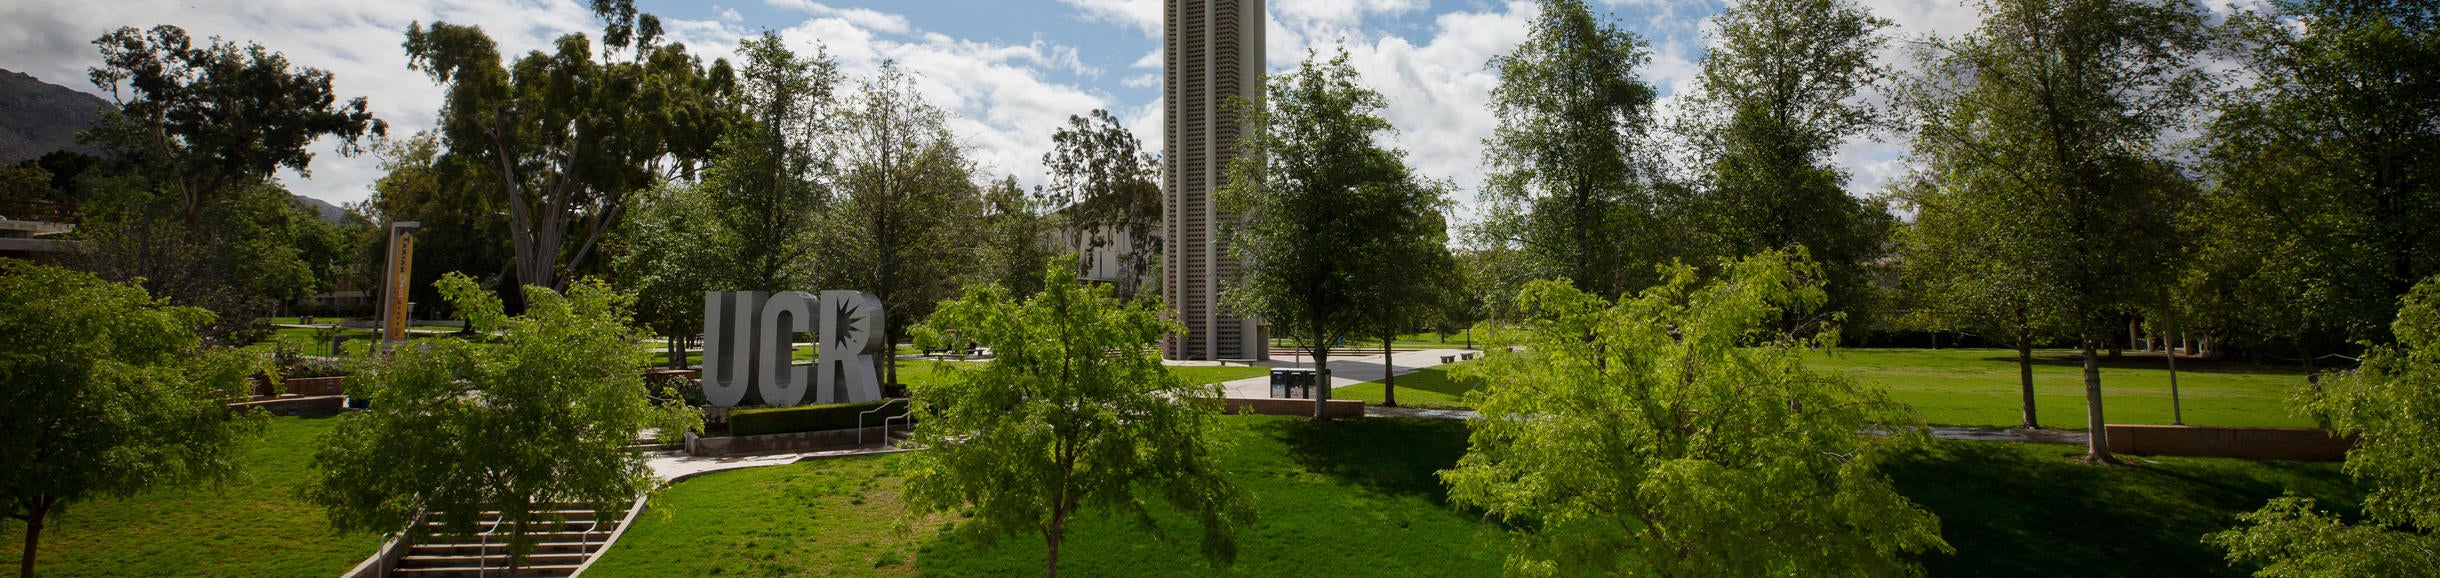 UCR and Bell Tower on a Sunny Day